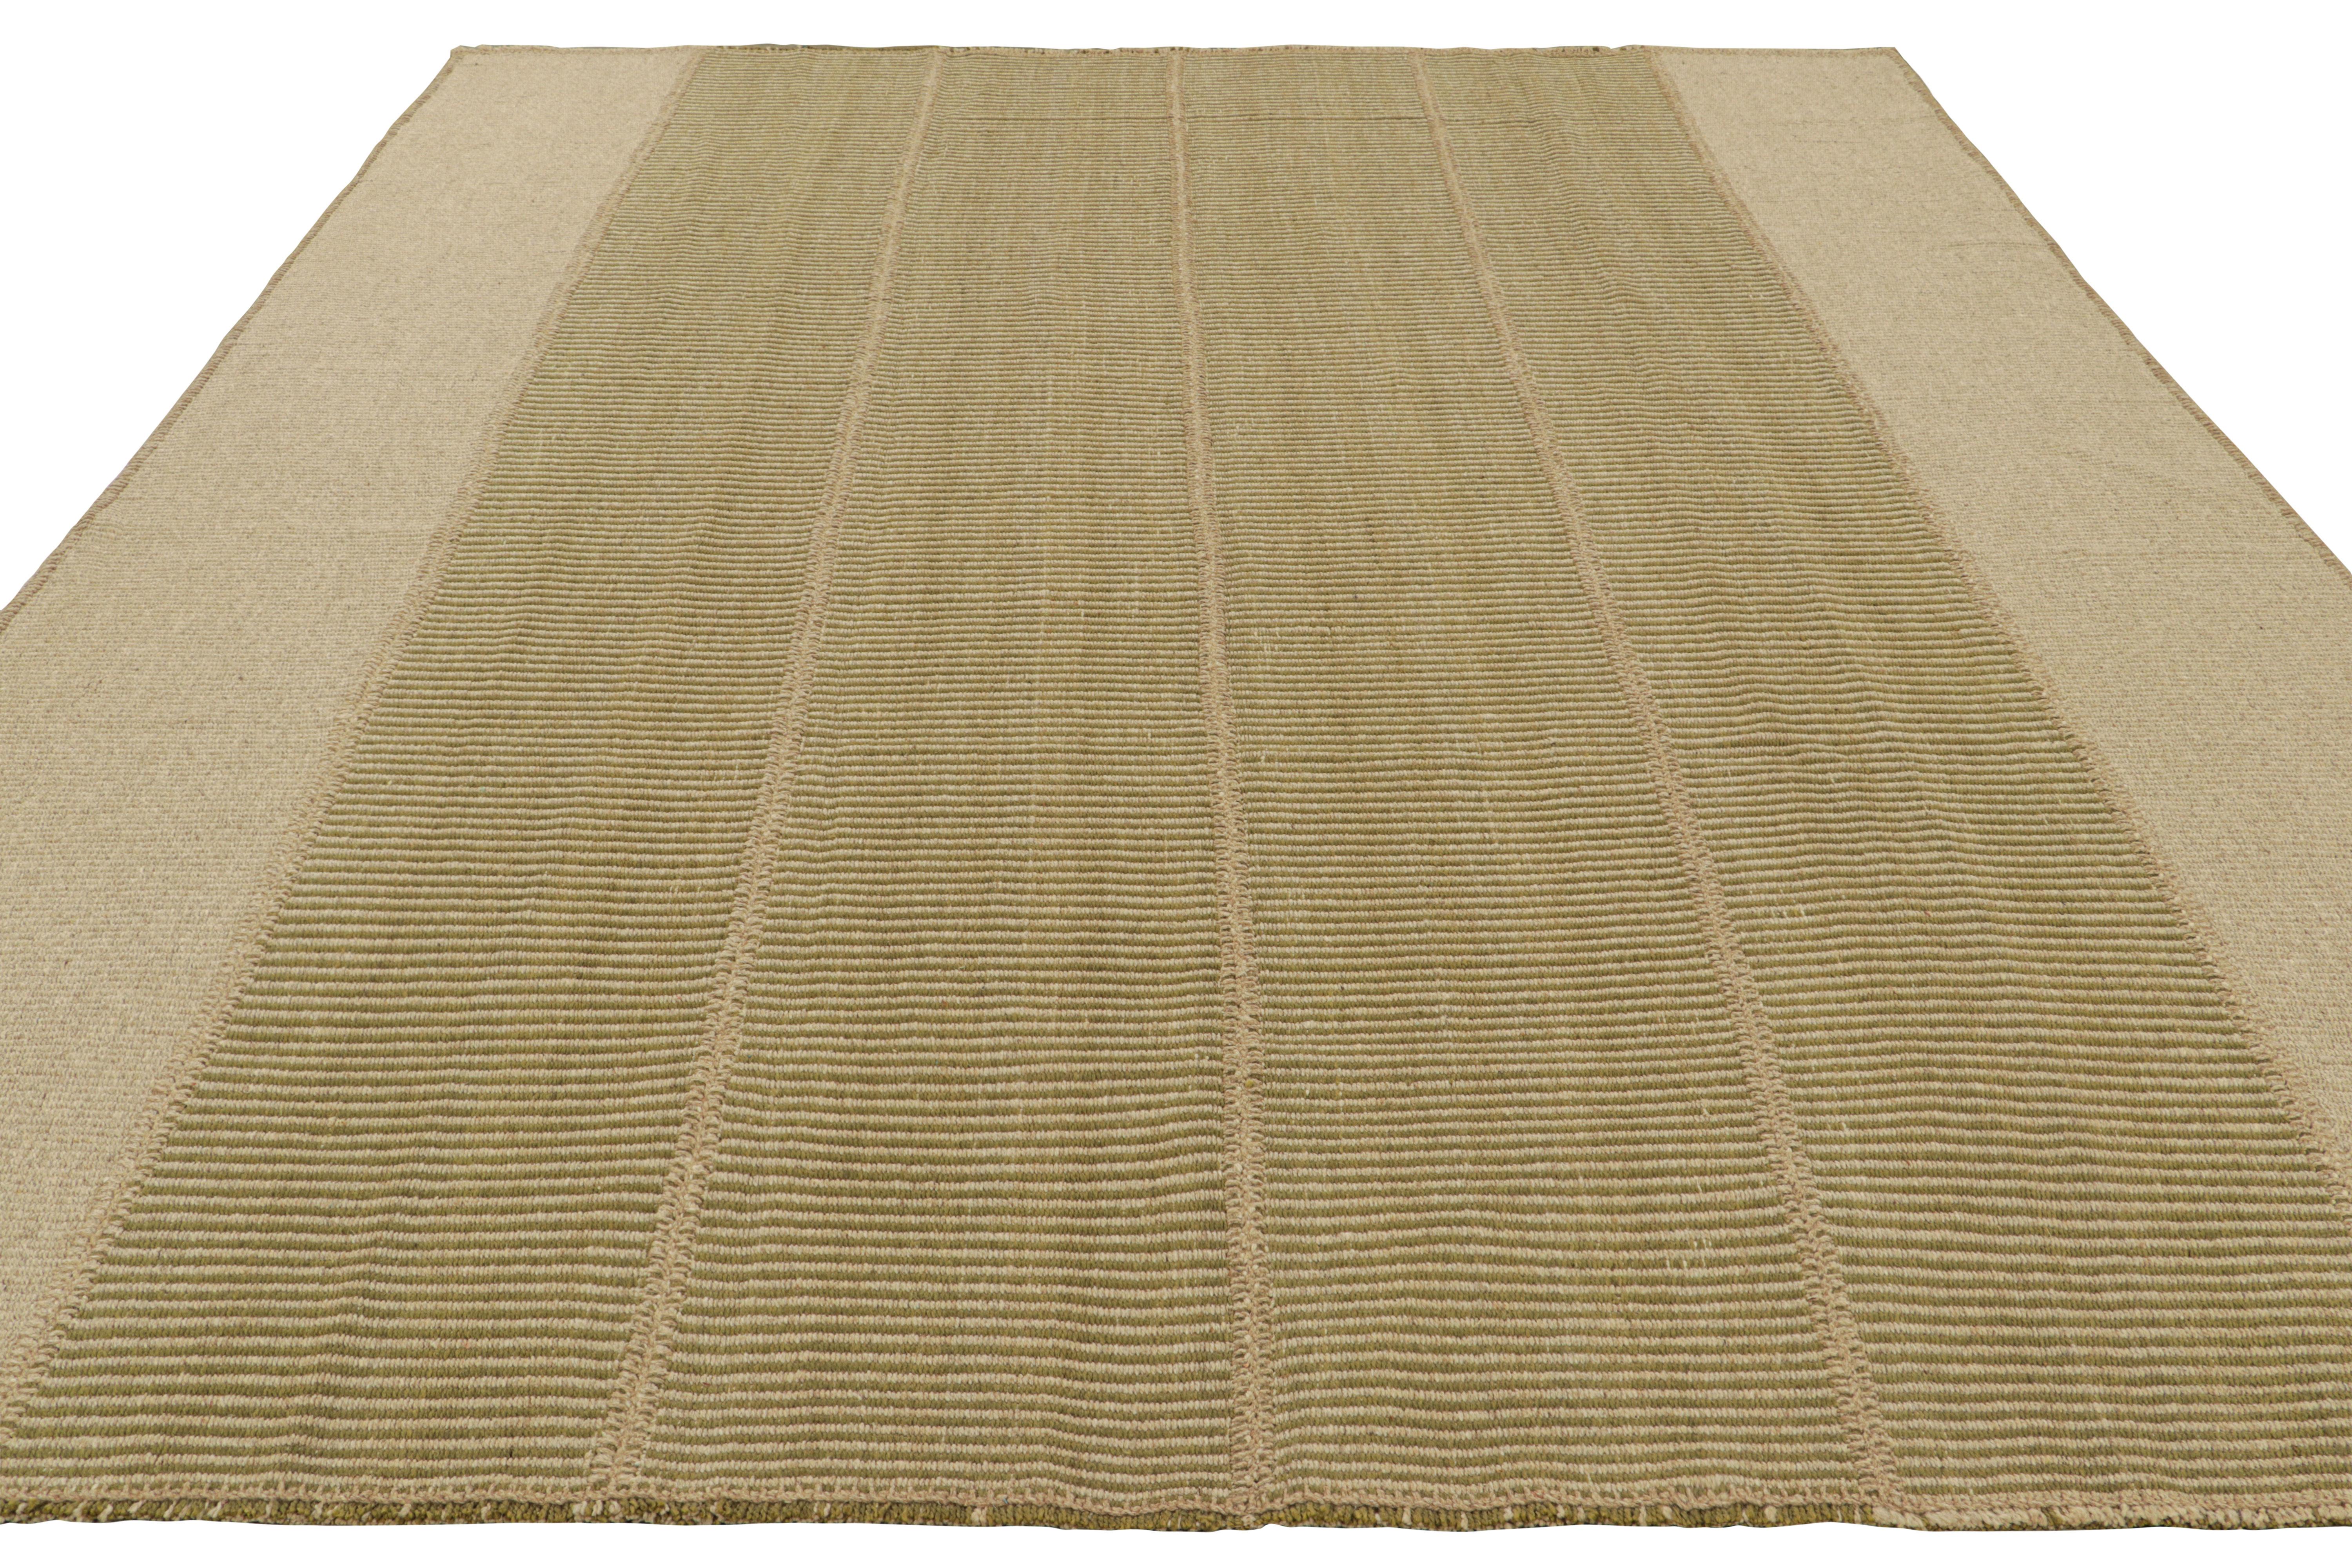 Hand-Woven Rug & Kilim’s Contemporary Kilim with Stripes in Green and Beige-Brown Accents For Sale